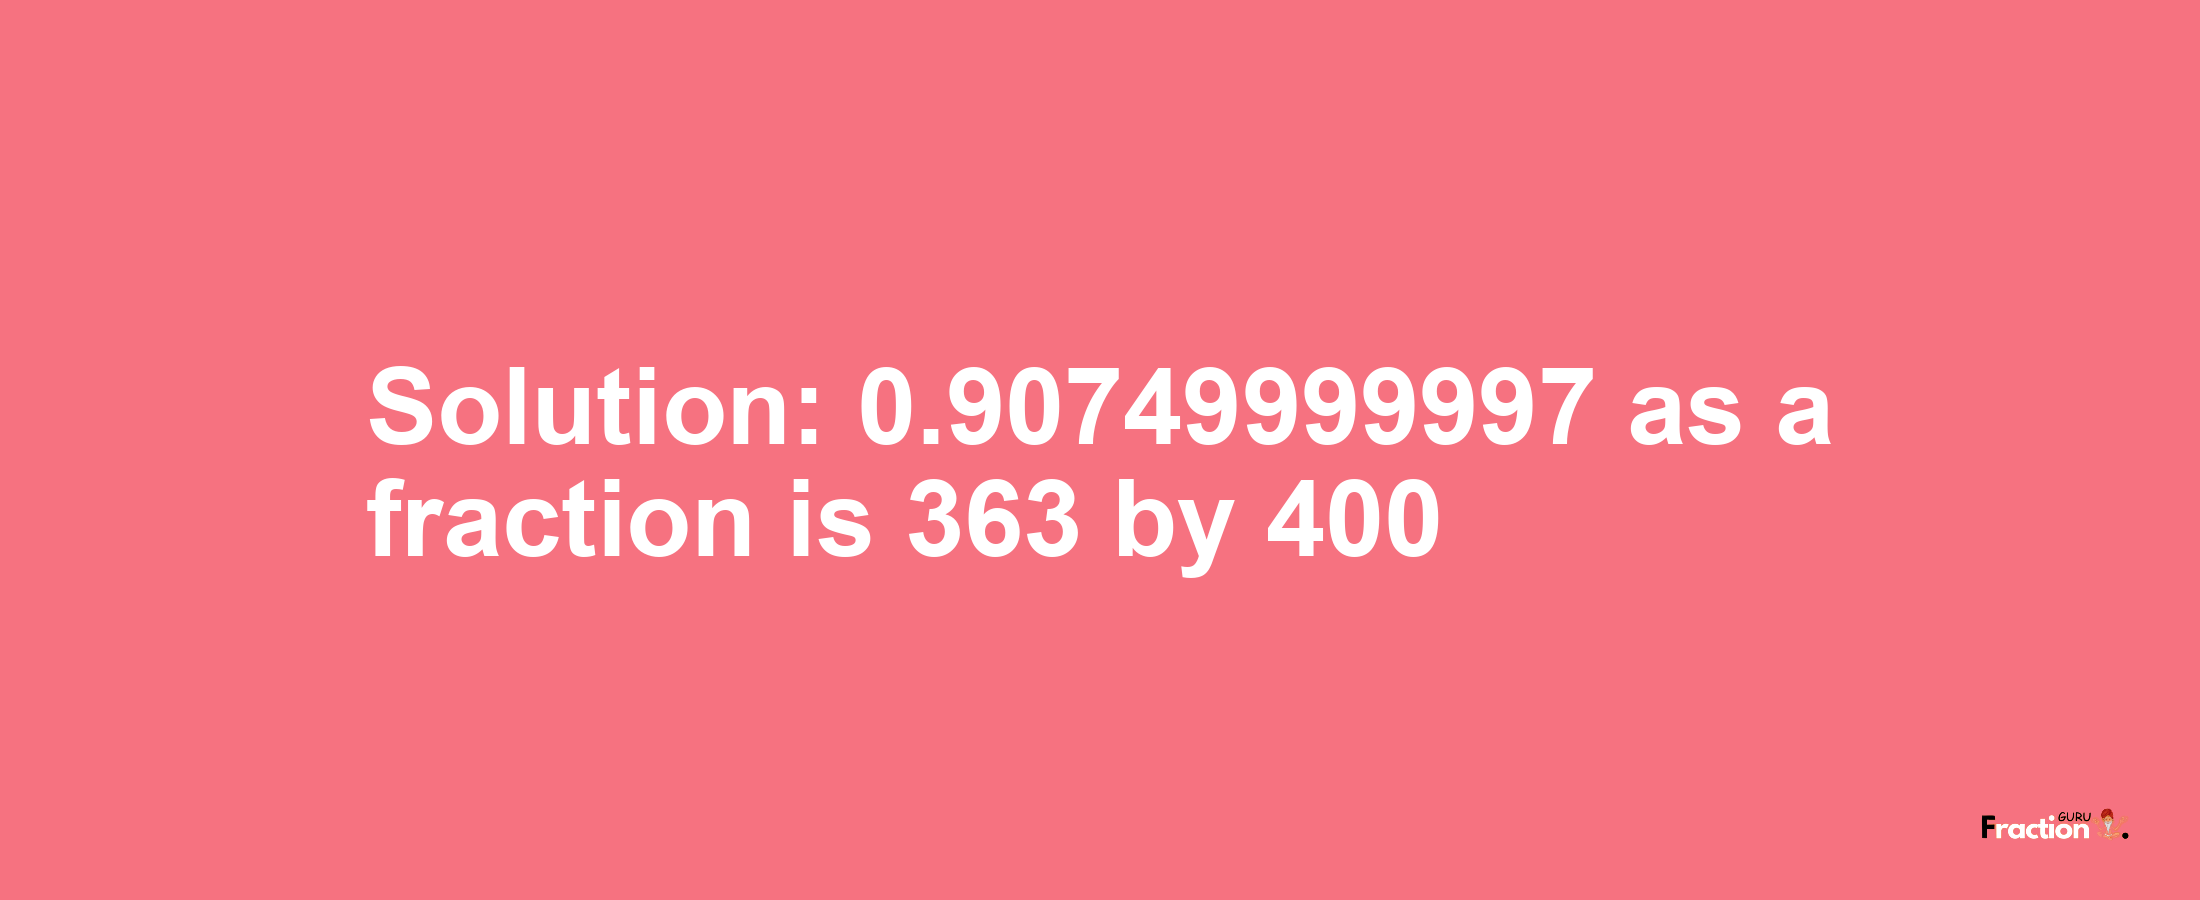 Solution:0.90749999997 as a fraction is 363/400